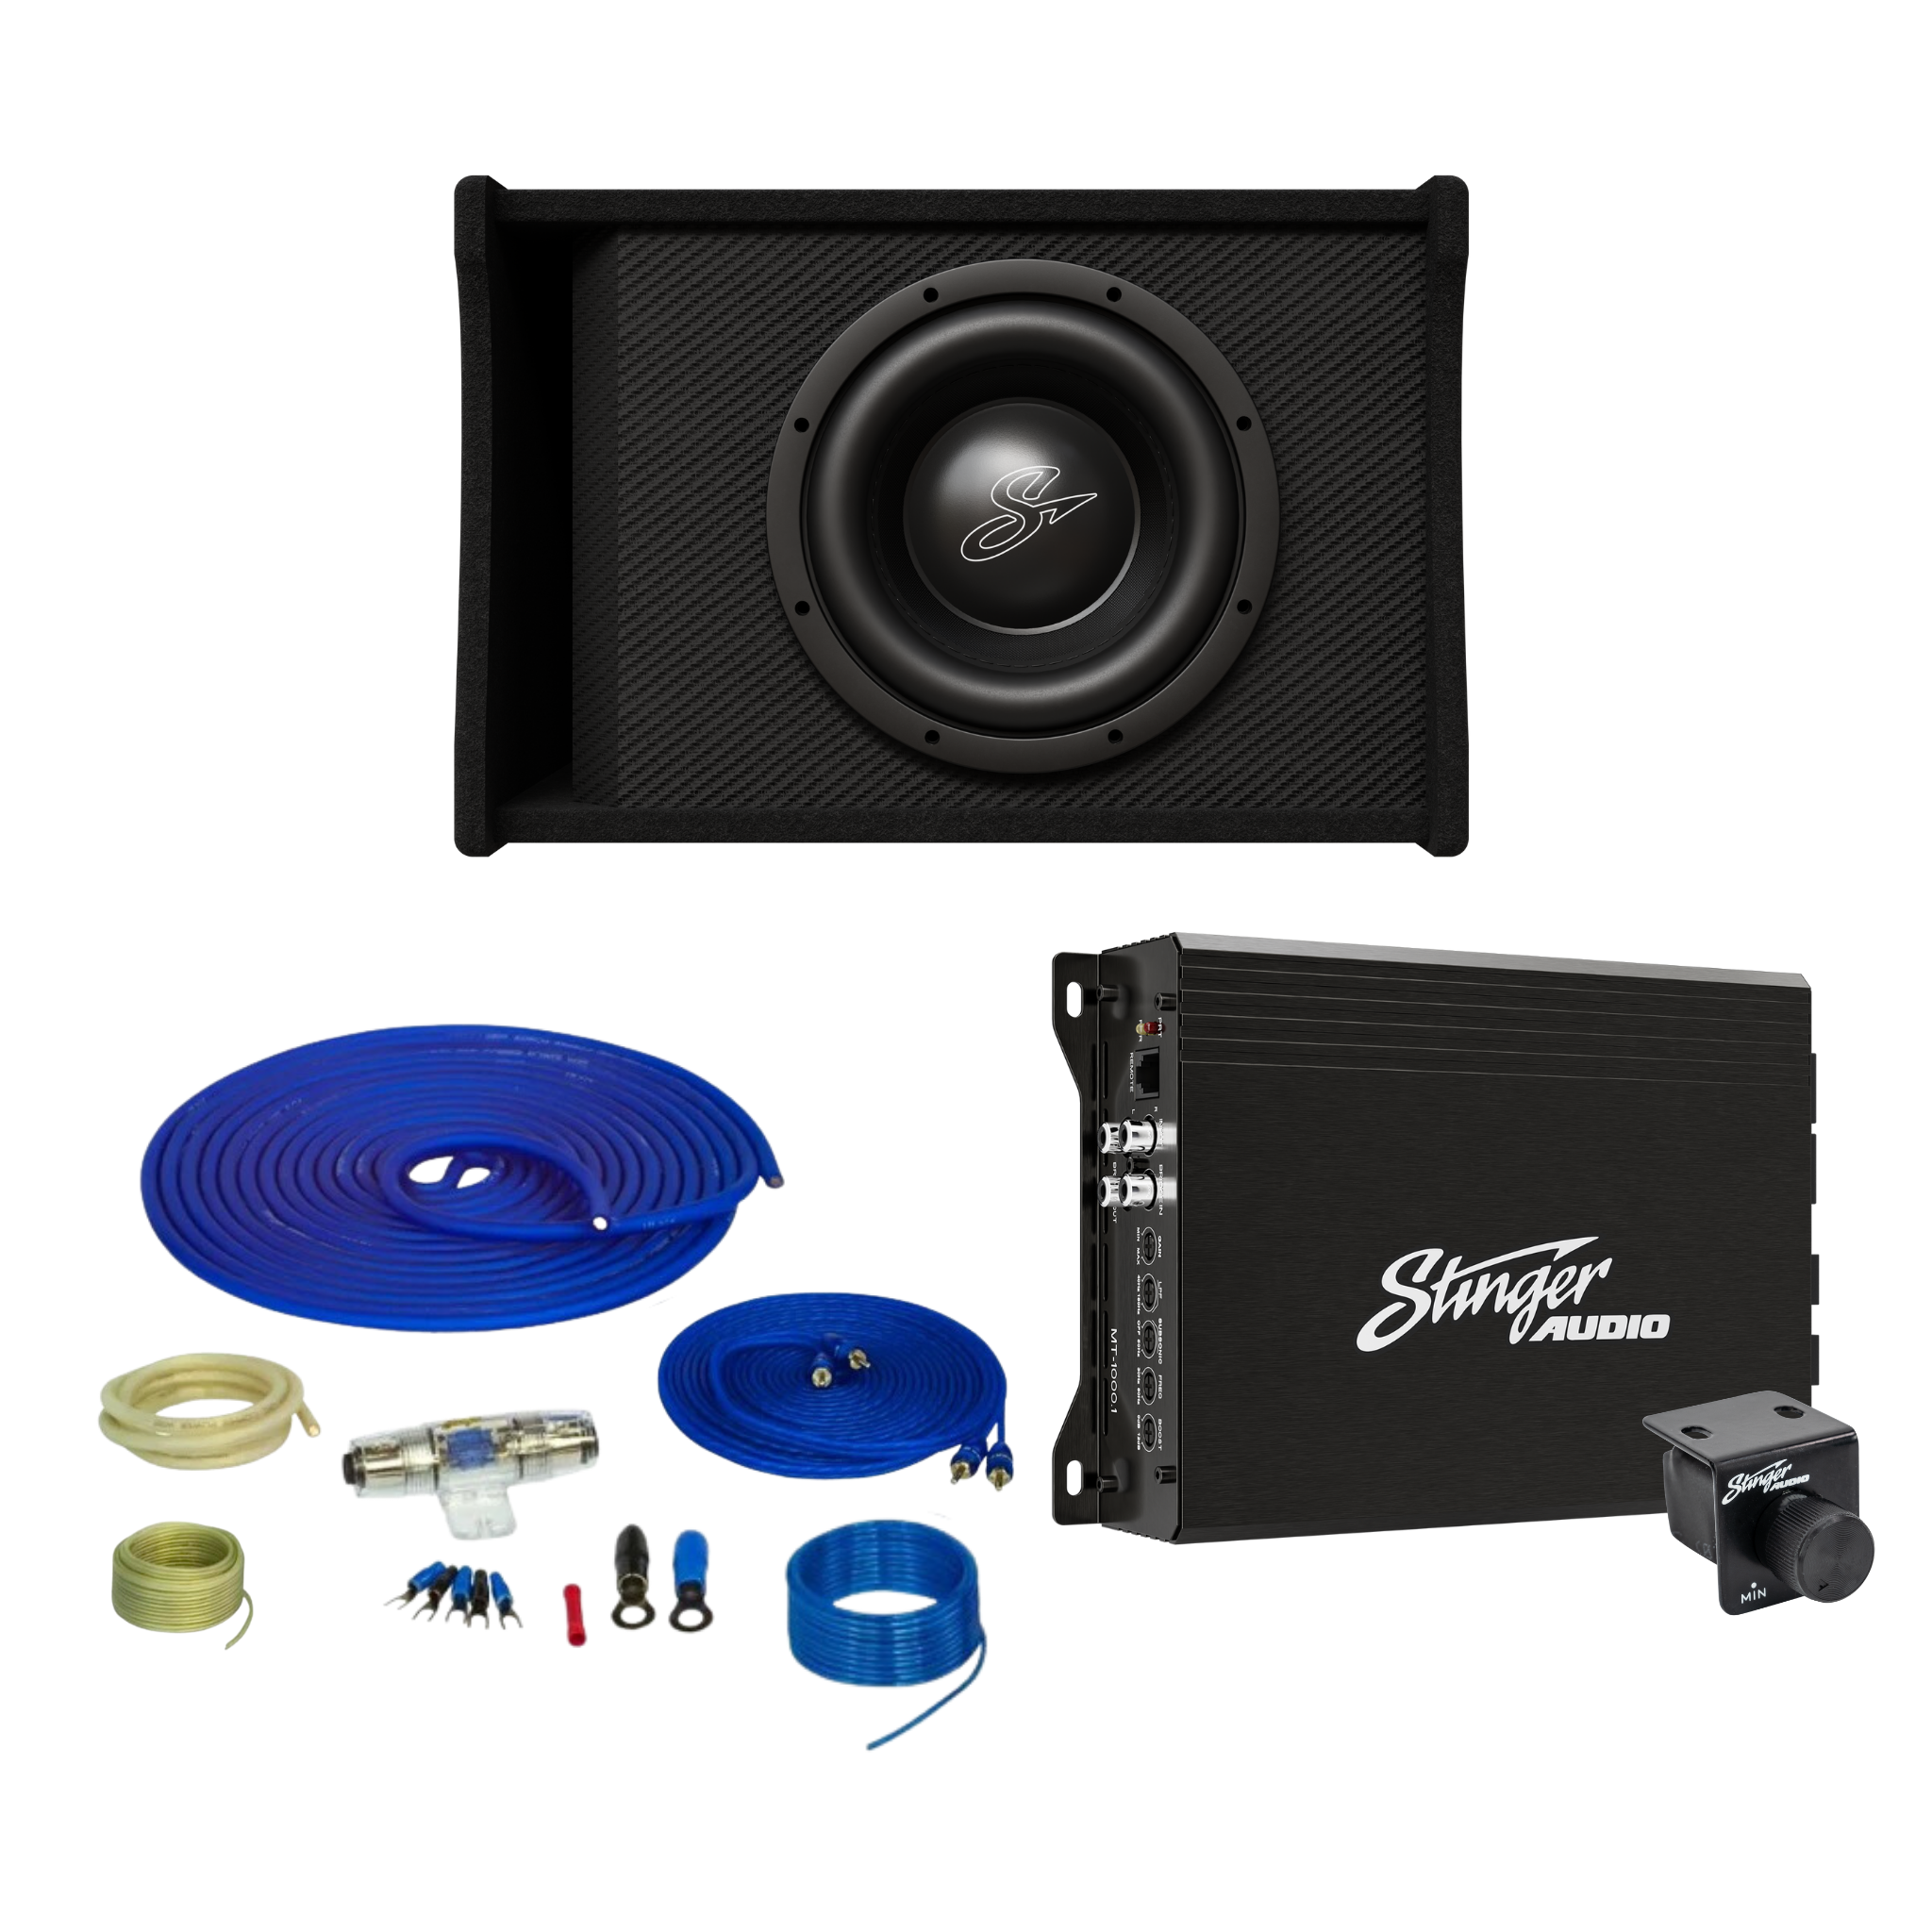 Single 10" 1,000 Watt (RMS) Loaded Ported Subwoofer Enclosure (1,000 Watts RMS/1,500 Watts Max) Bass Package with Amplifier & Complete Wiring Kit